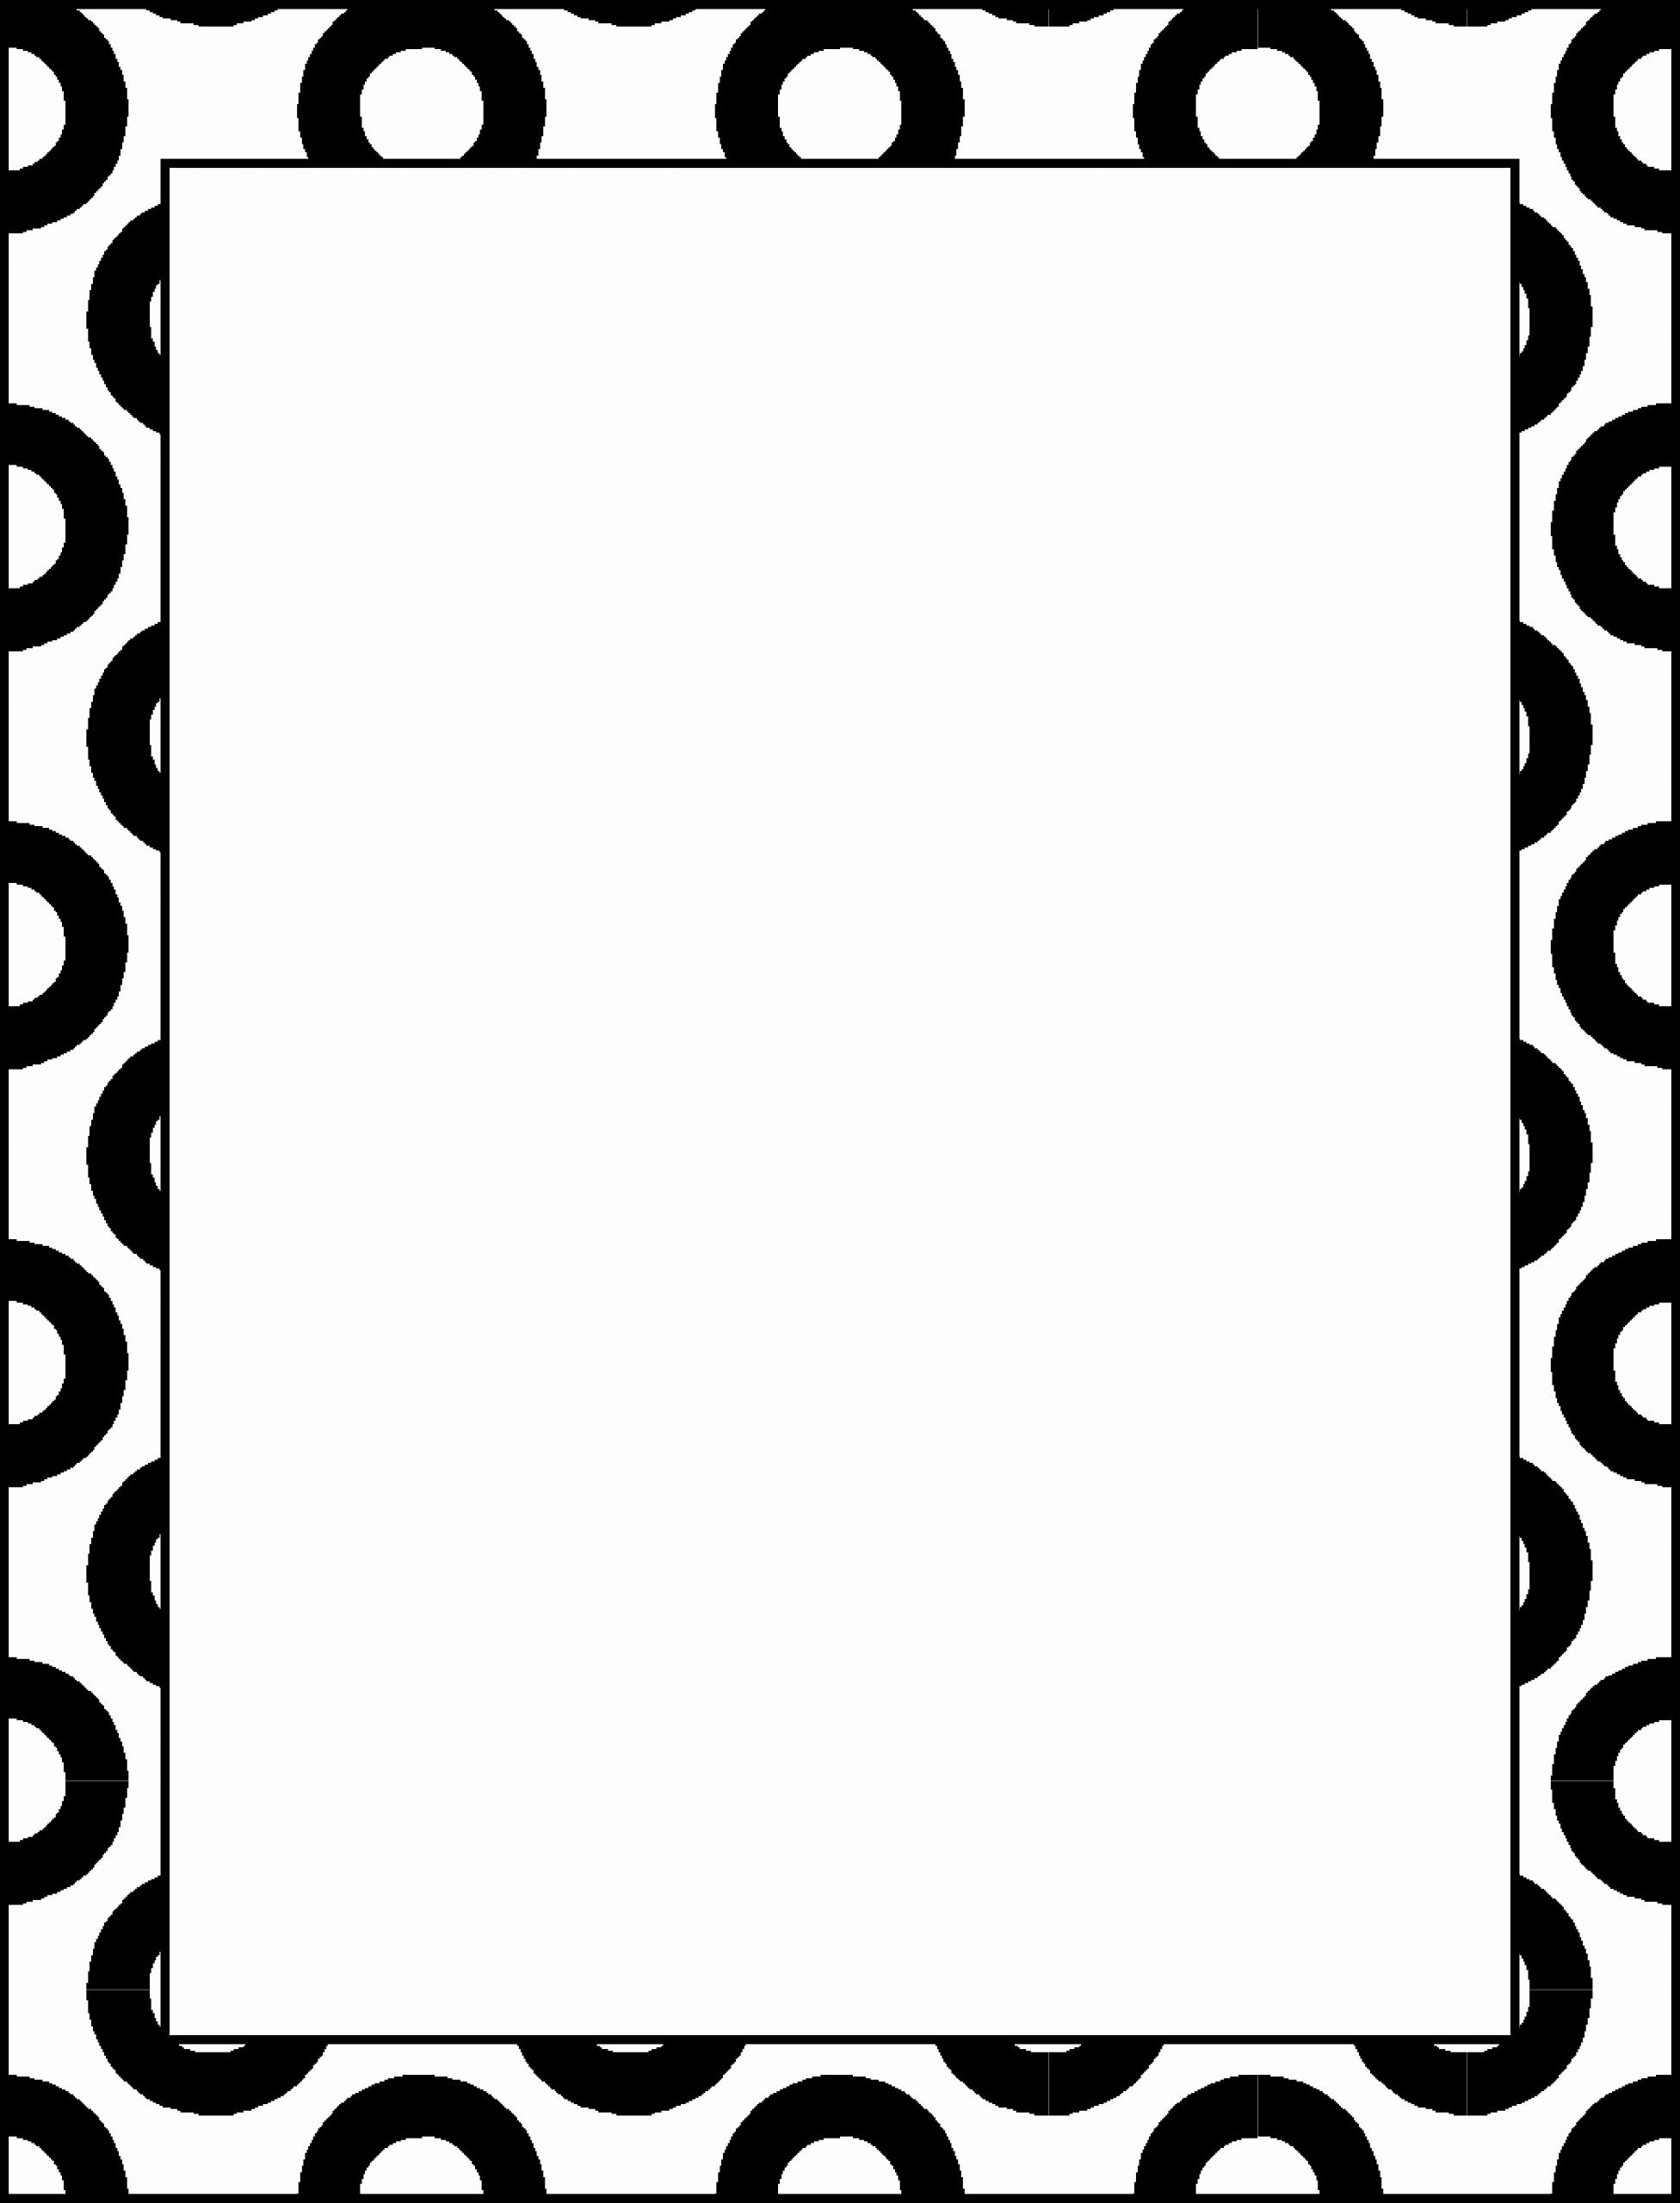 Formal Black and White Borders for Word Lovely Borders for Word Black and White Clipart Best